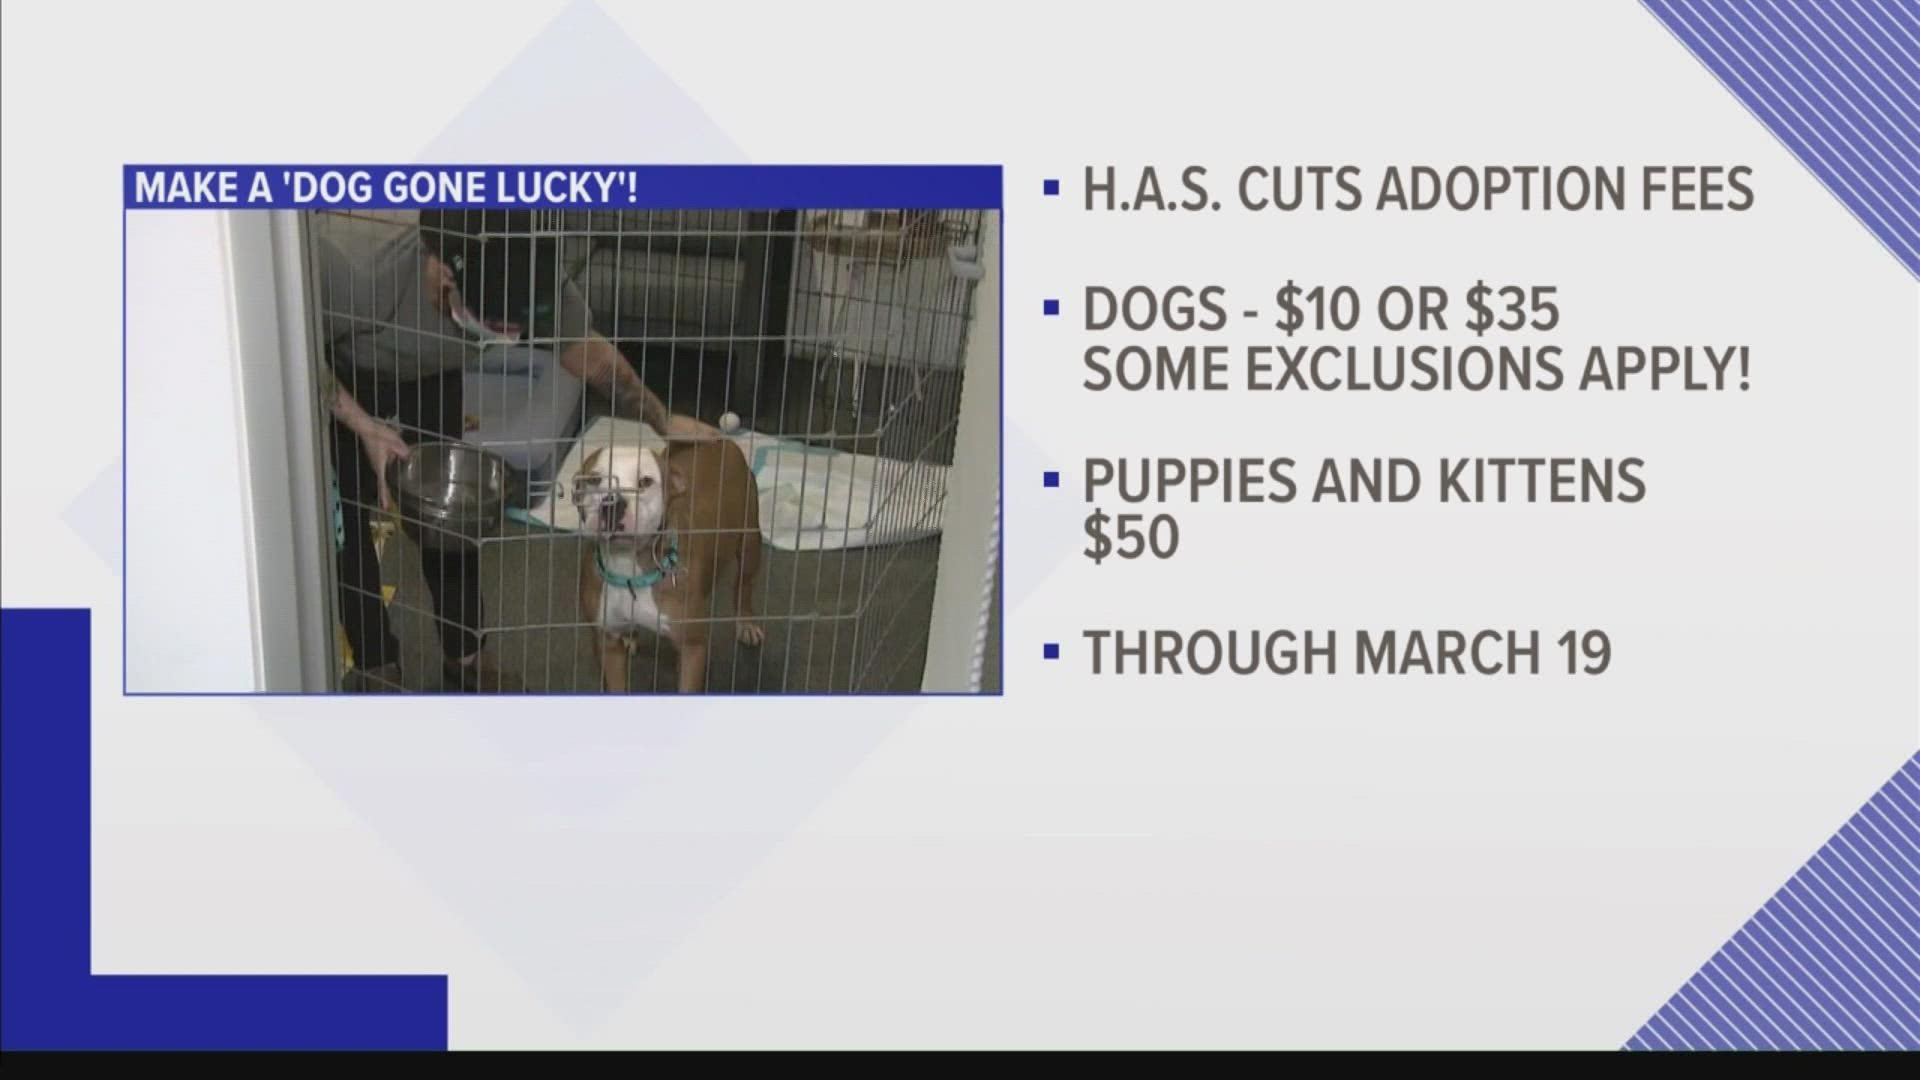 Reduced adoption fees mean you can get lucky and take home a new furry friend!